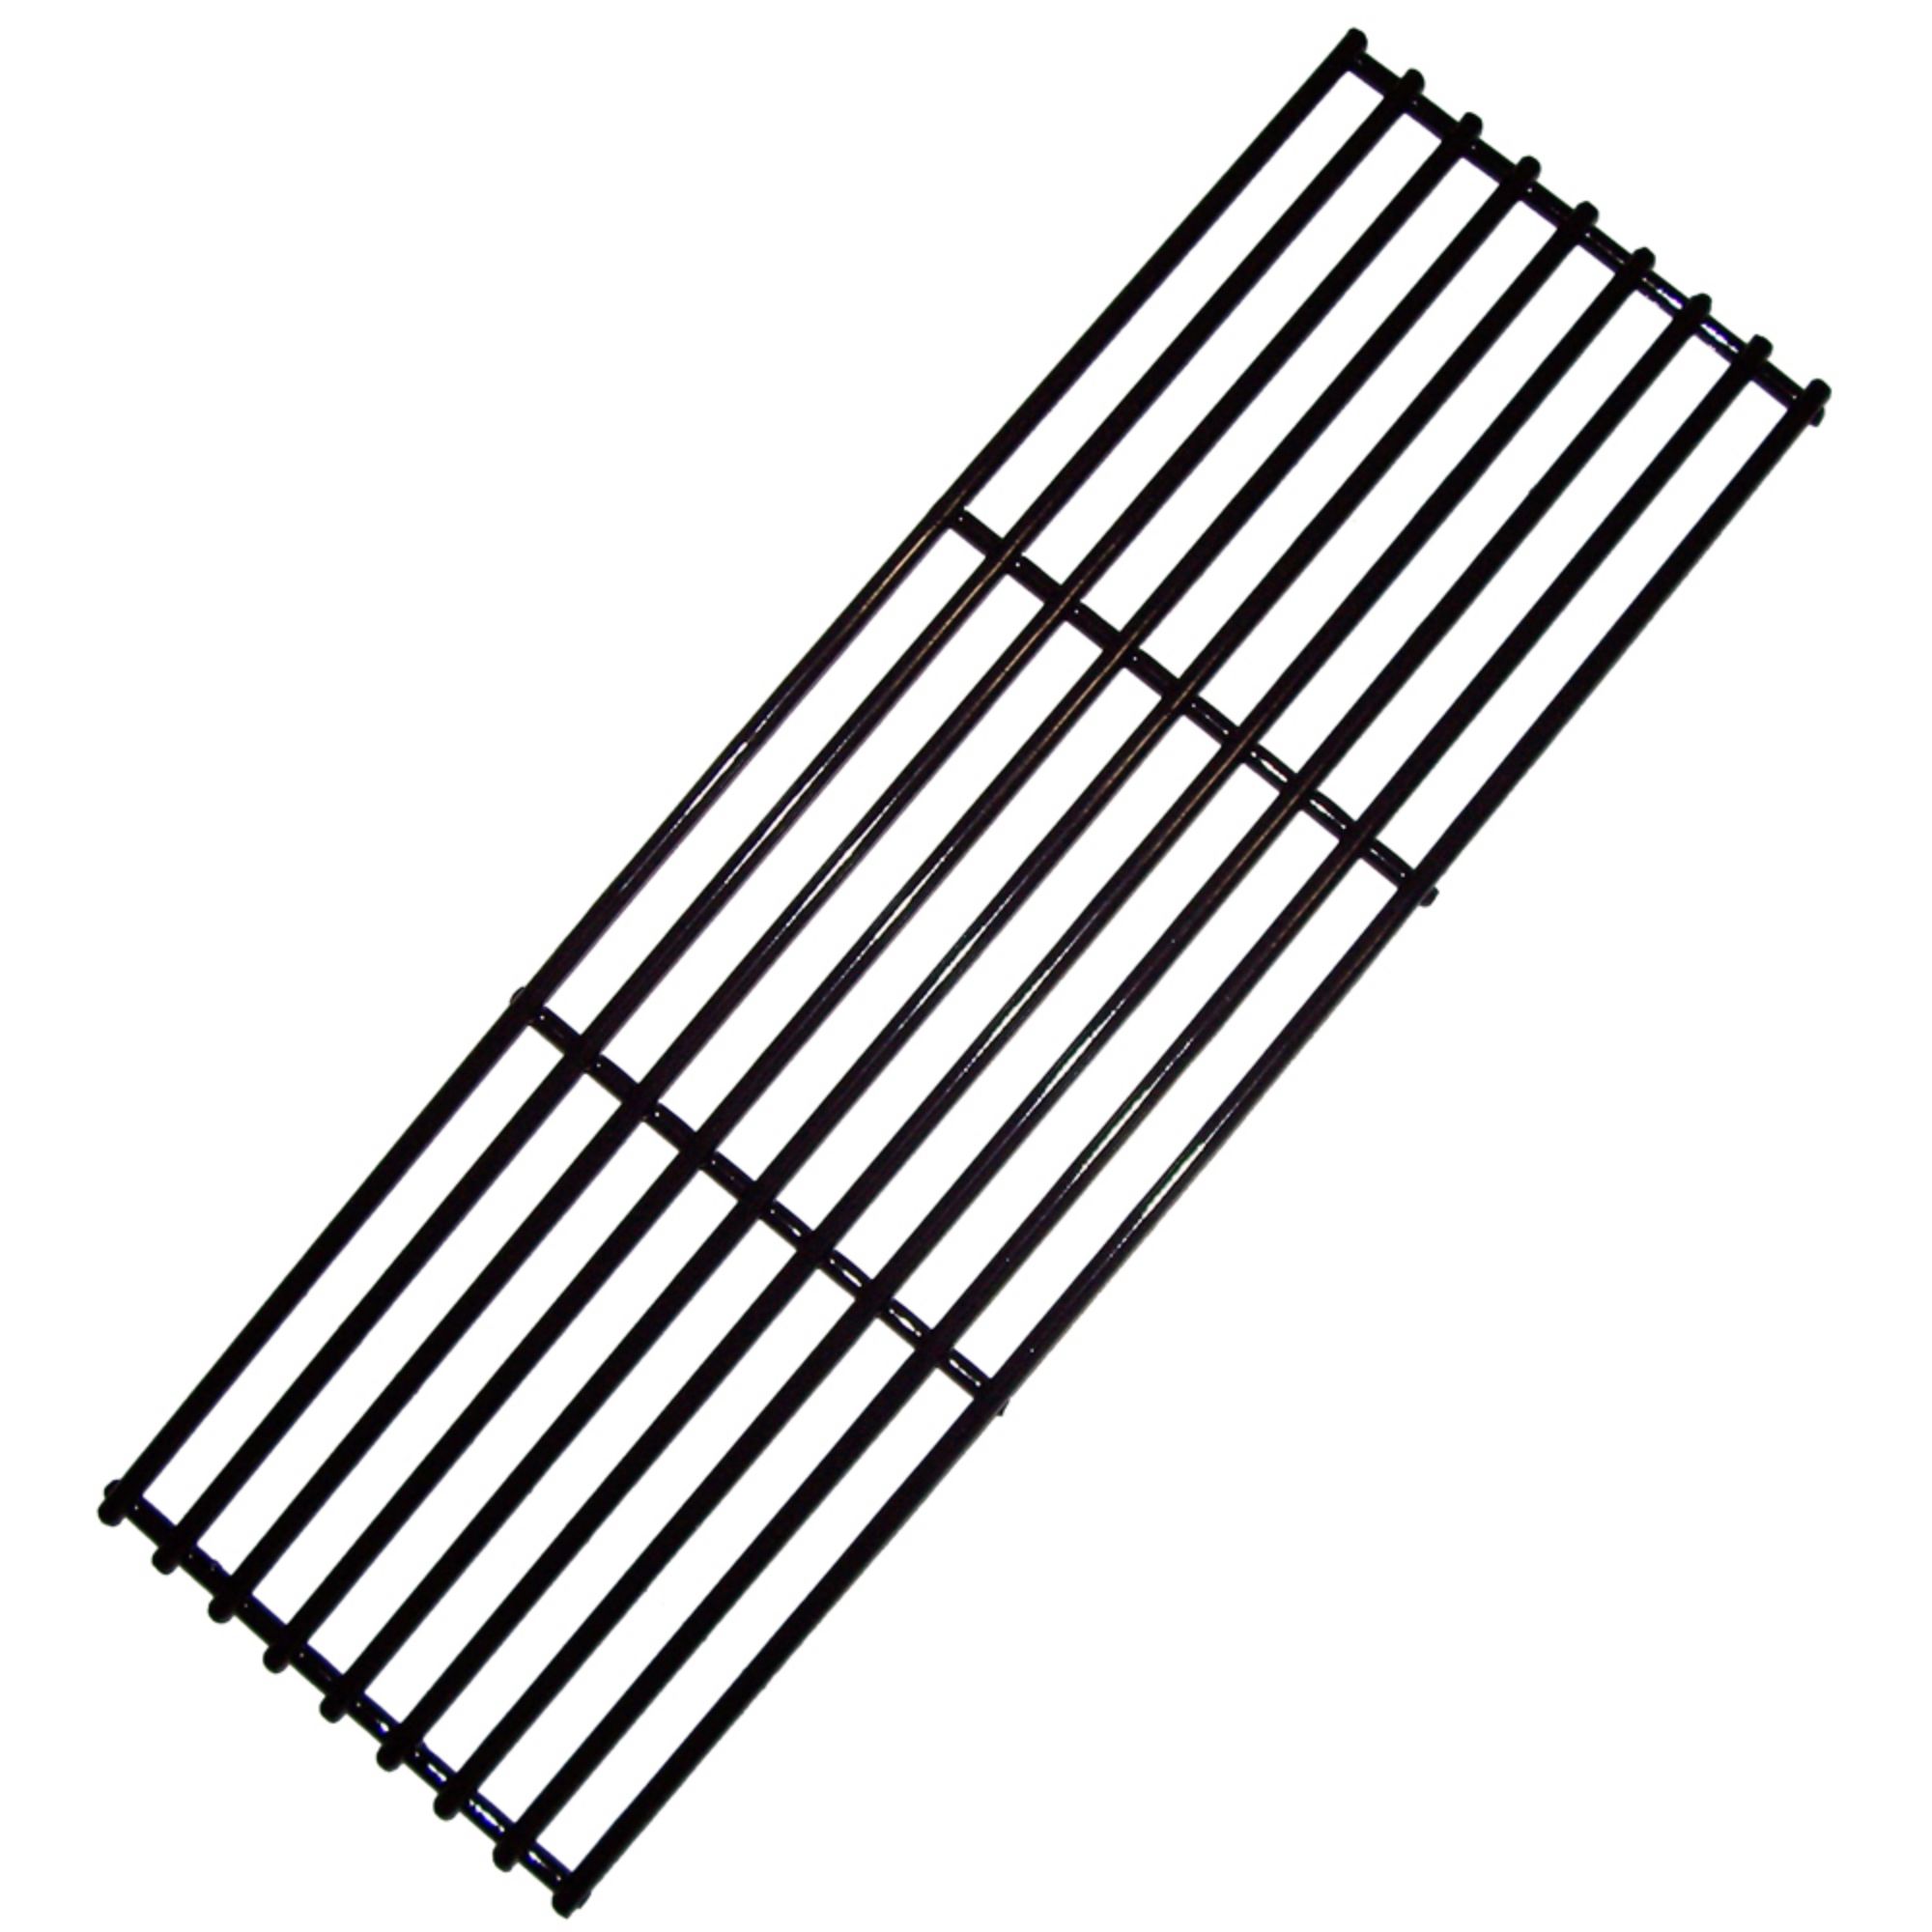 Porcelain Steel Wire Cooking Grid for Bakers & Chefs, Charbroil, Grand Hall, Kenmore, Outdoor Gourmet, Turbo Brand Gas Grills